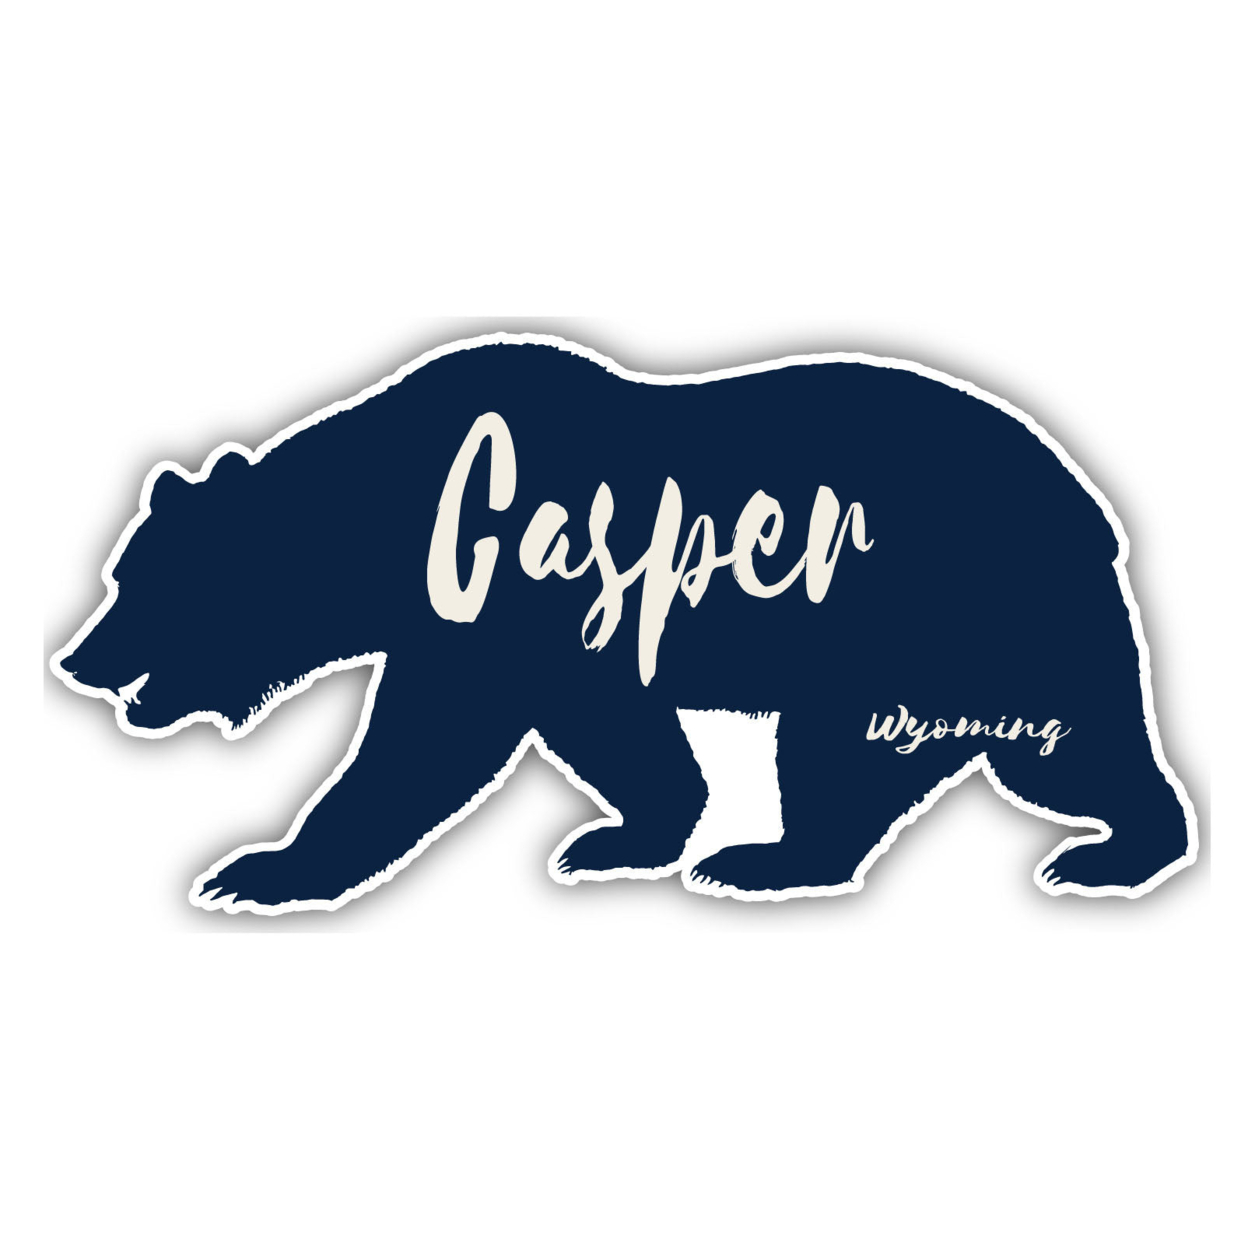 Casper Wyoming Souvenir Decorative Stickers (Choose Theme And Size) - 4-Pack, 8-Inch, Bear